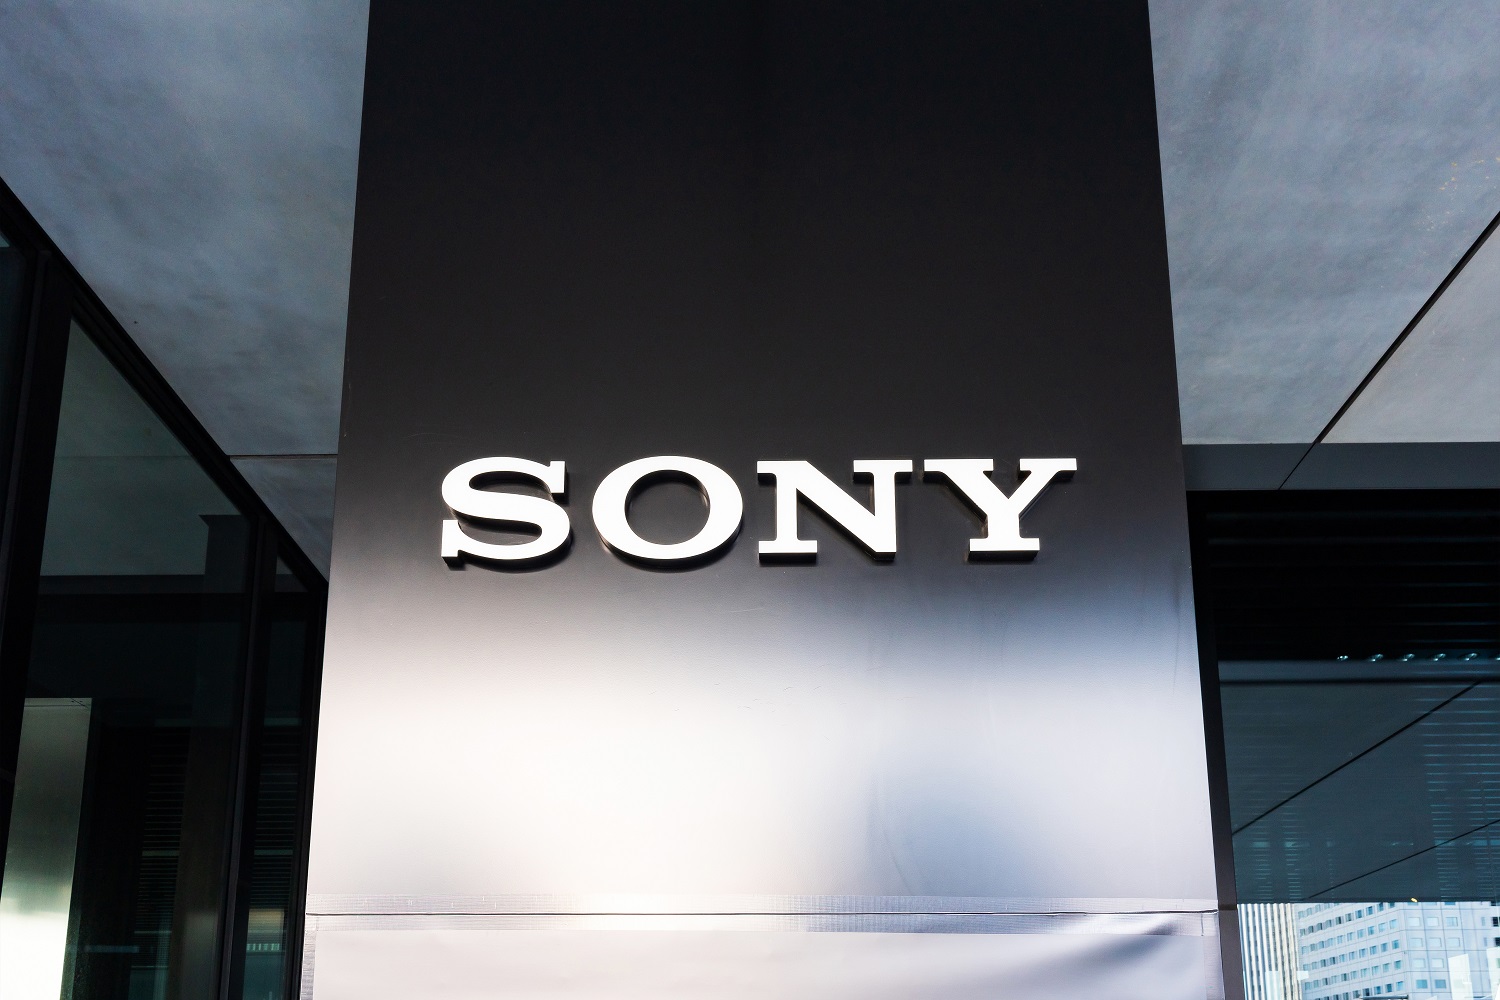 Sony Makes Blockchain Move as Japanese Firms Flood to Web3 Space